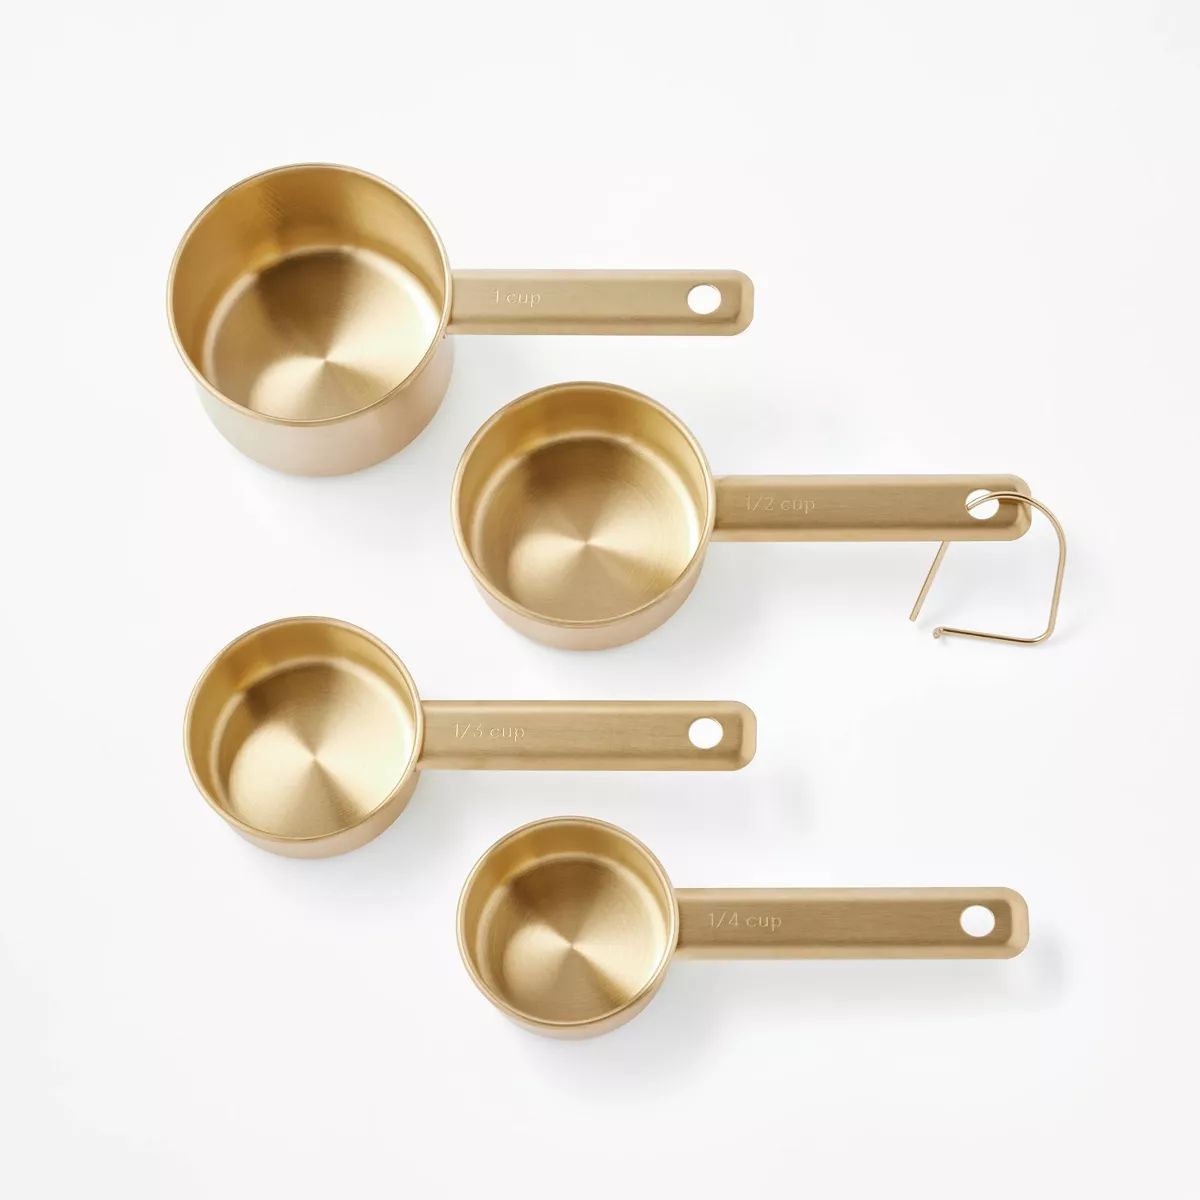 4pc Stainless Steel Measuring Cups Champagne - Figmint™ | Target